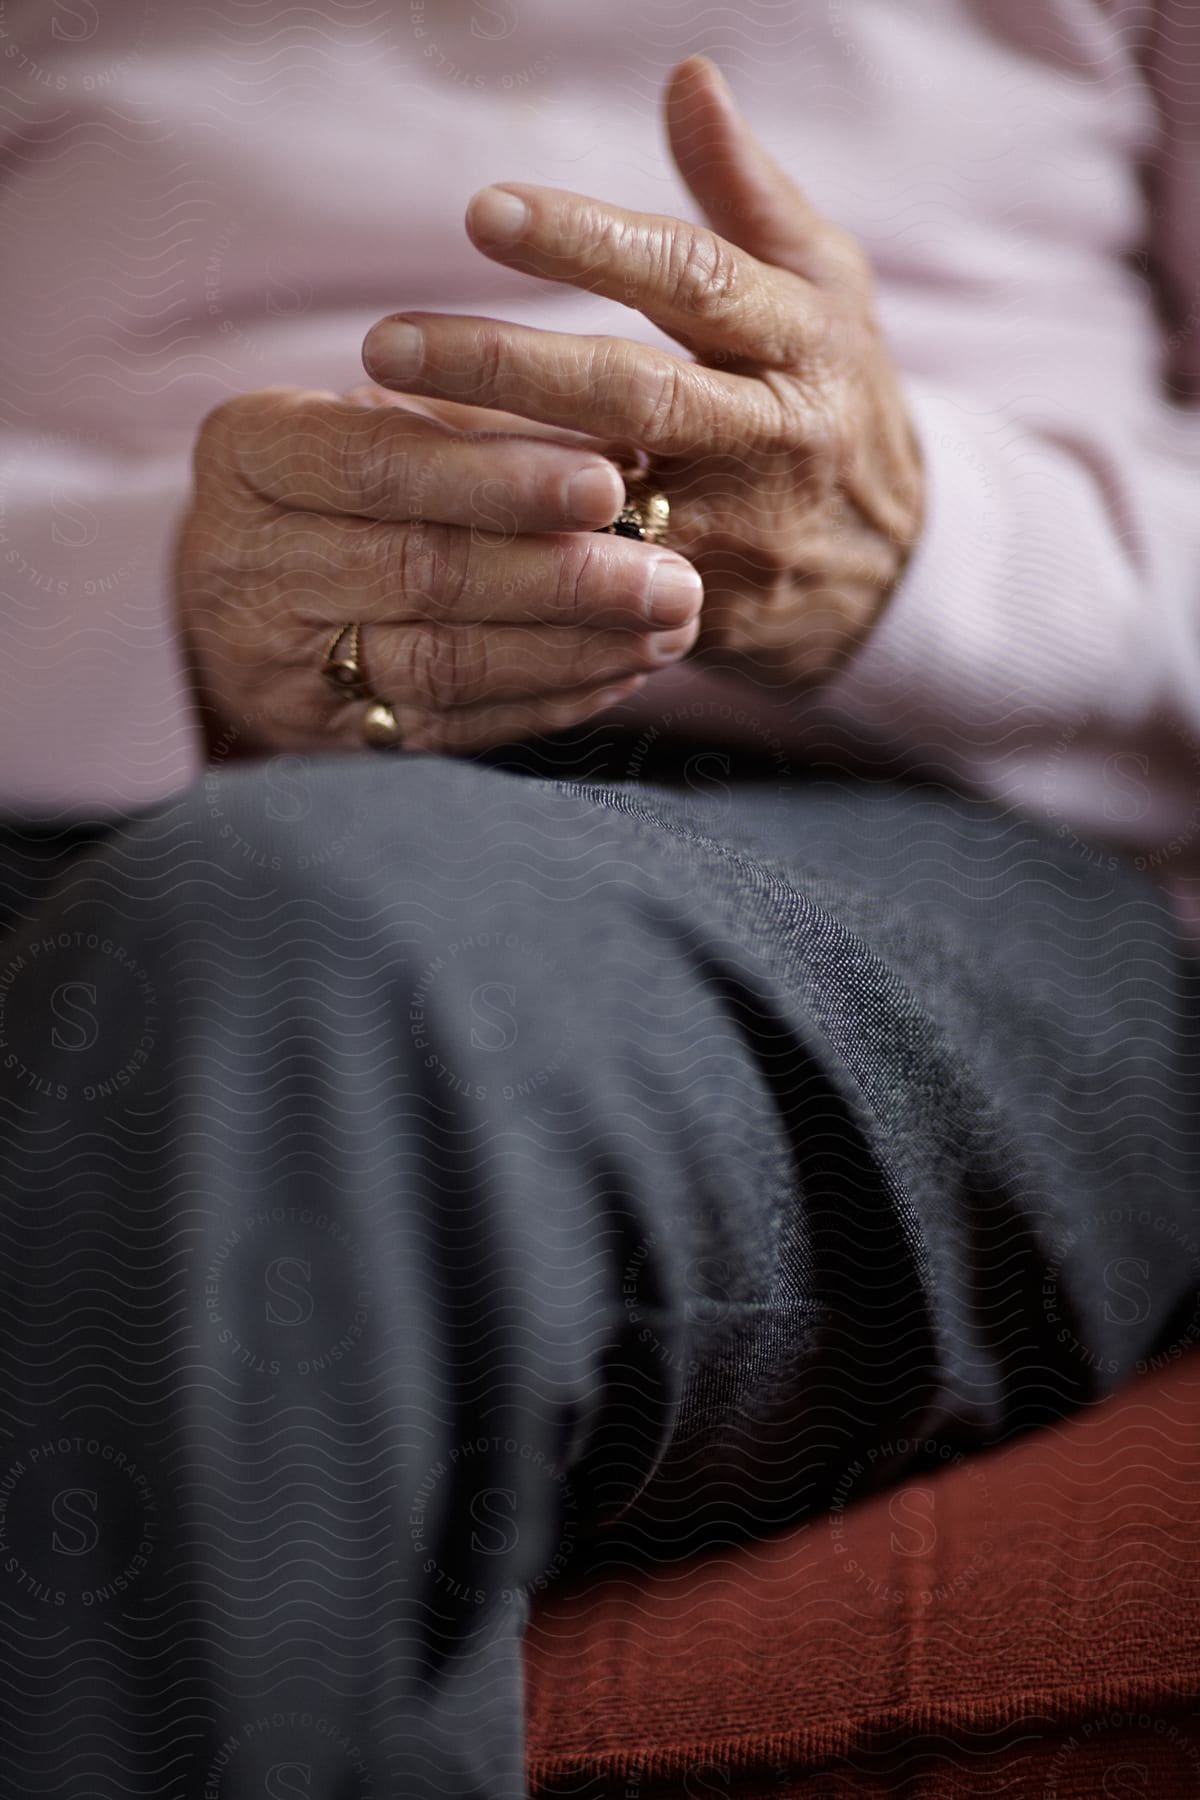 Person sitting down is moving with the rings on their finger